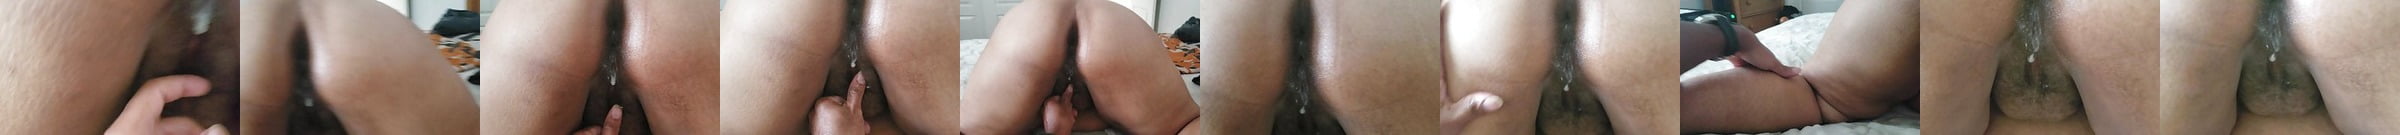 Fucking My Latina Wife Pussy Close Up And Cum Free Porn 1d Xhamster 